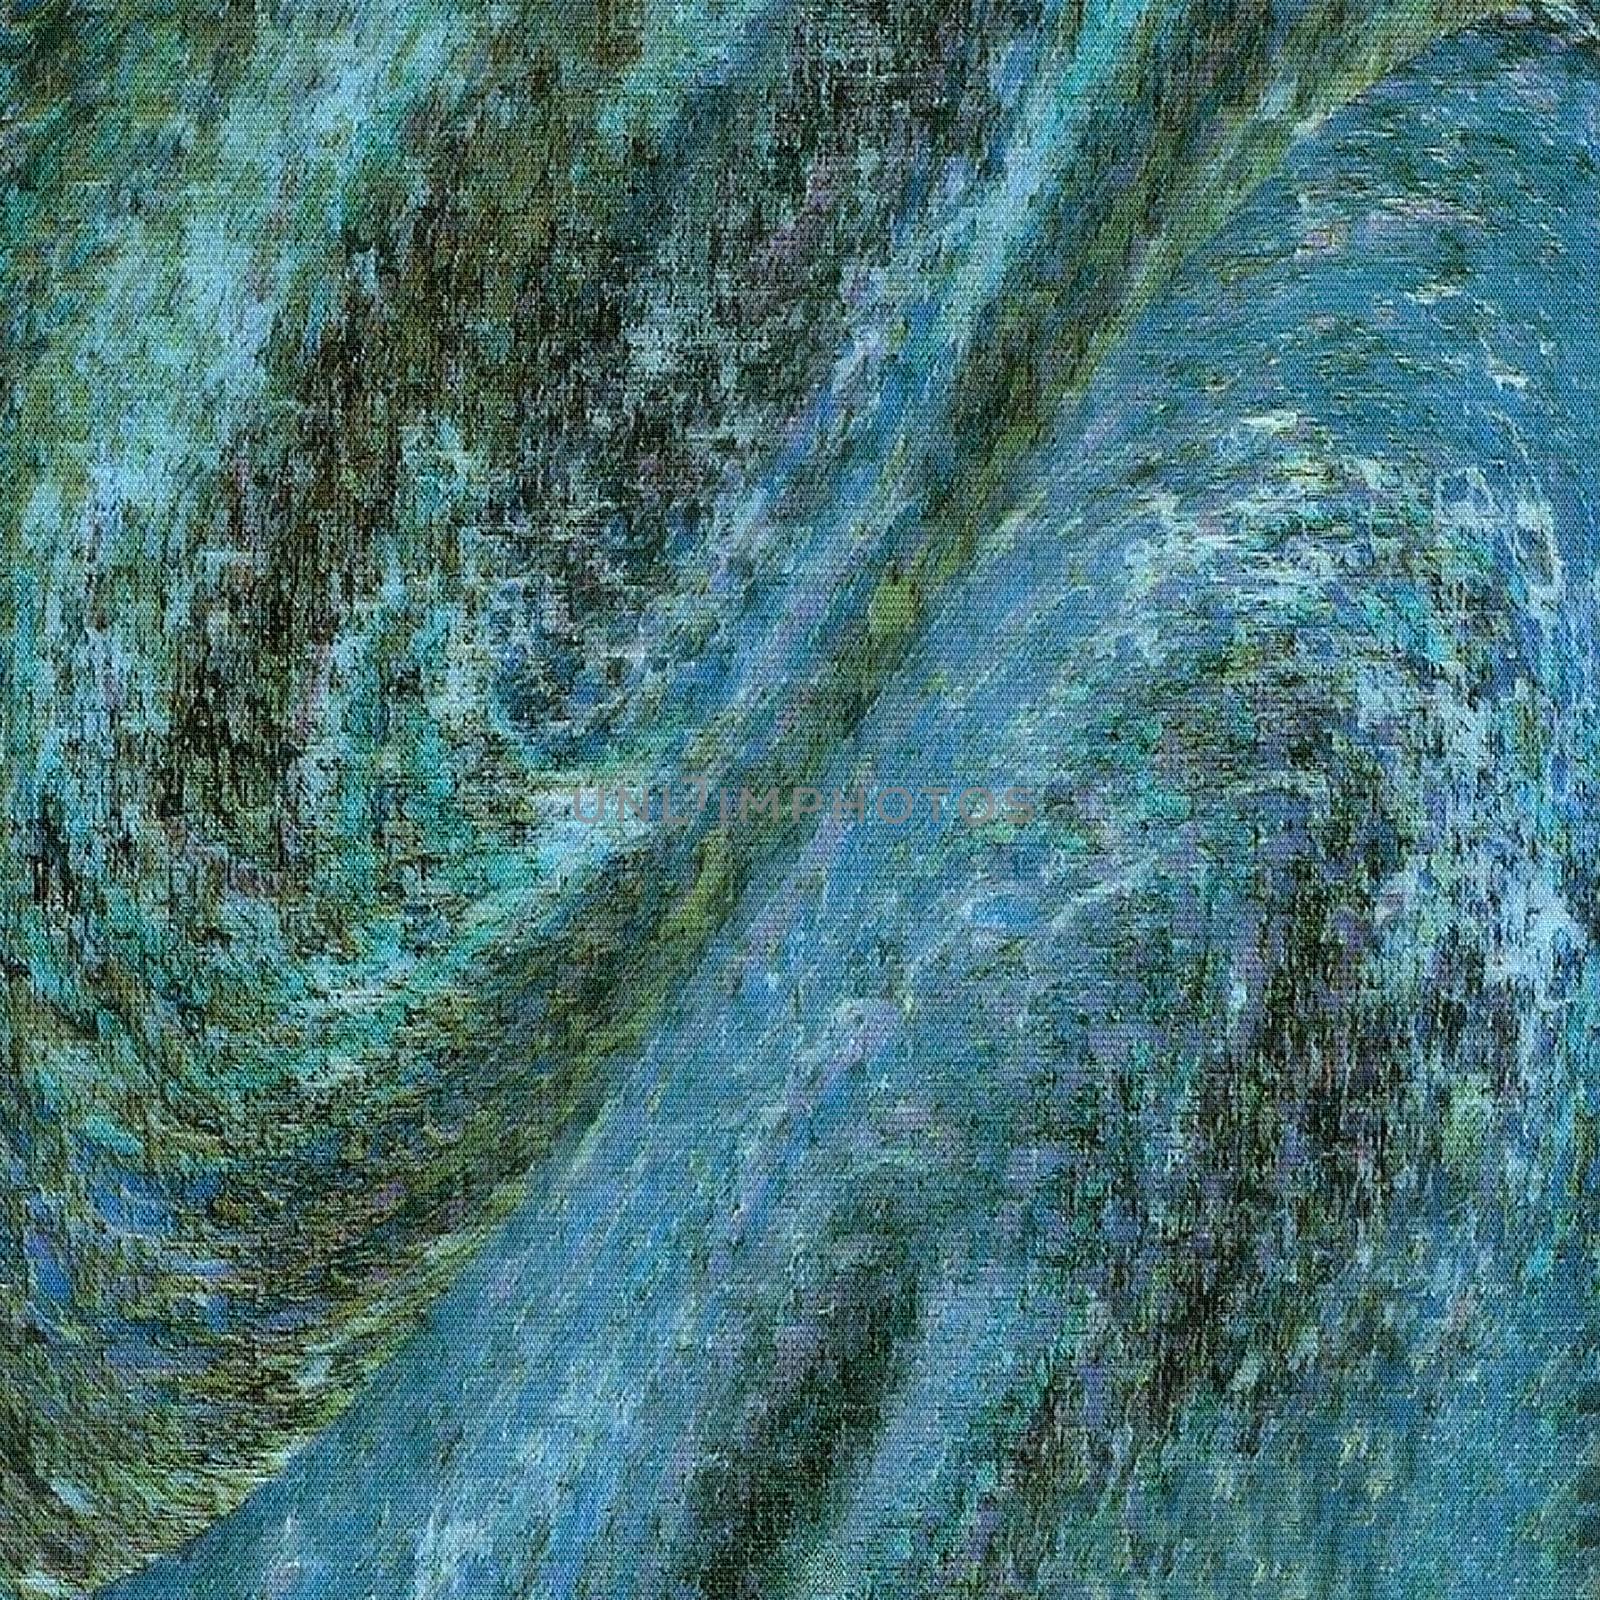 Wave abstraction in muted colors.